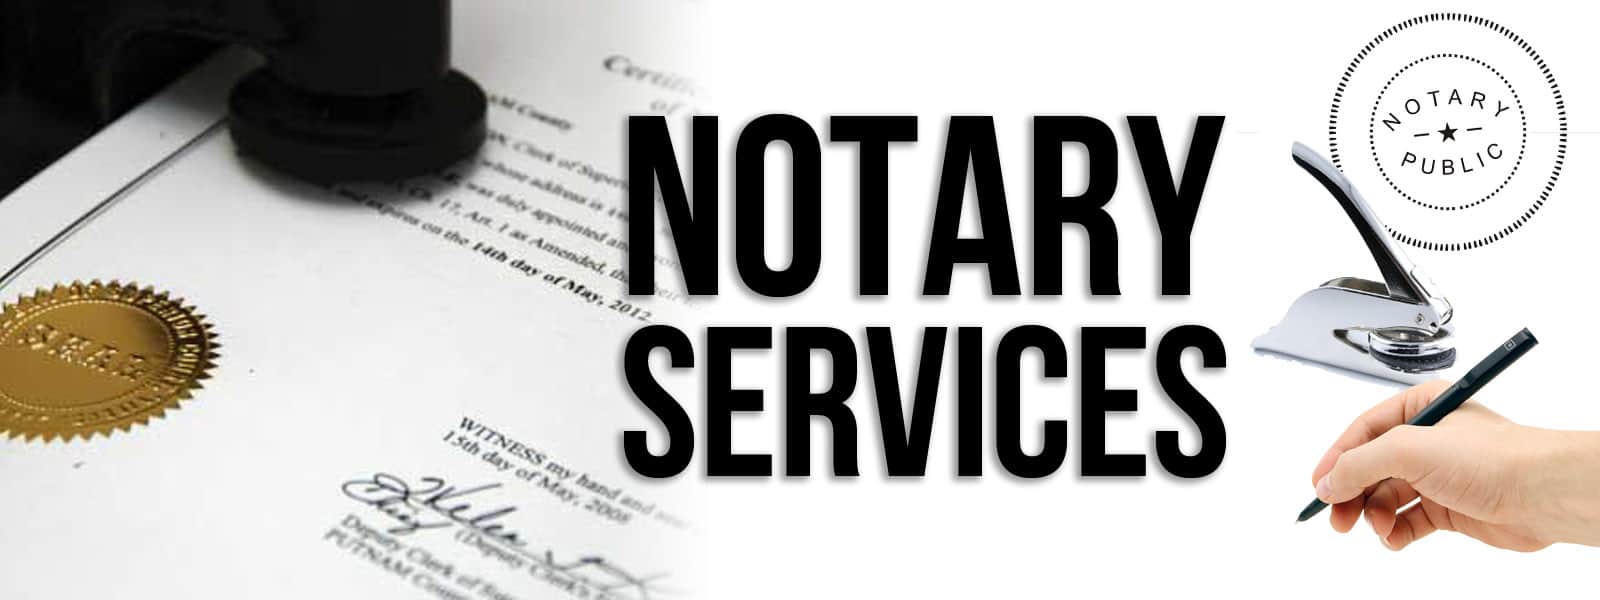 What is a notary public?